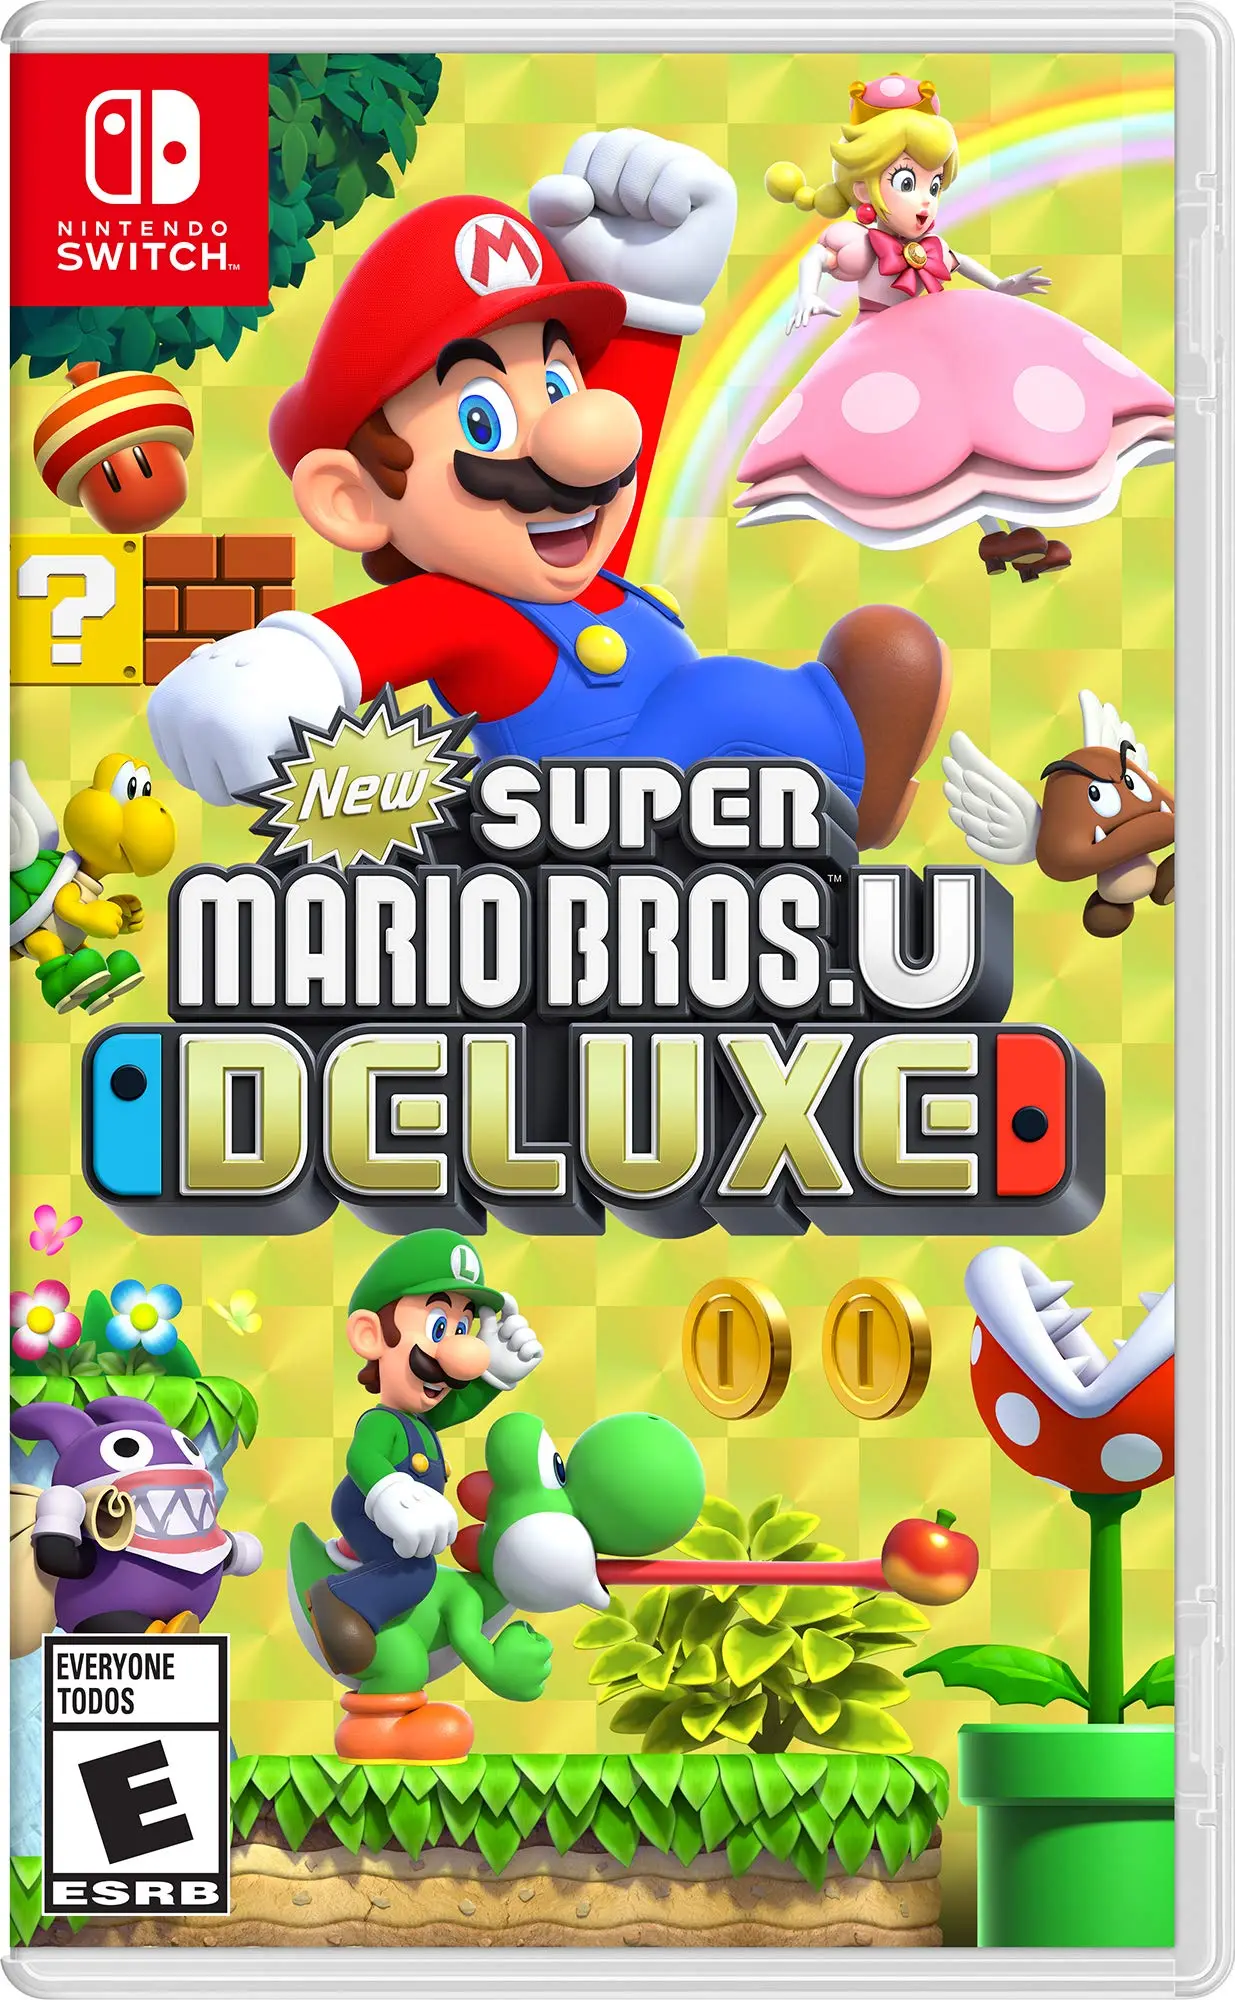 New Super Mario Bros. U Deluxe: The Ultimate Gaming Experience on Nintendo Switch